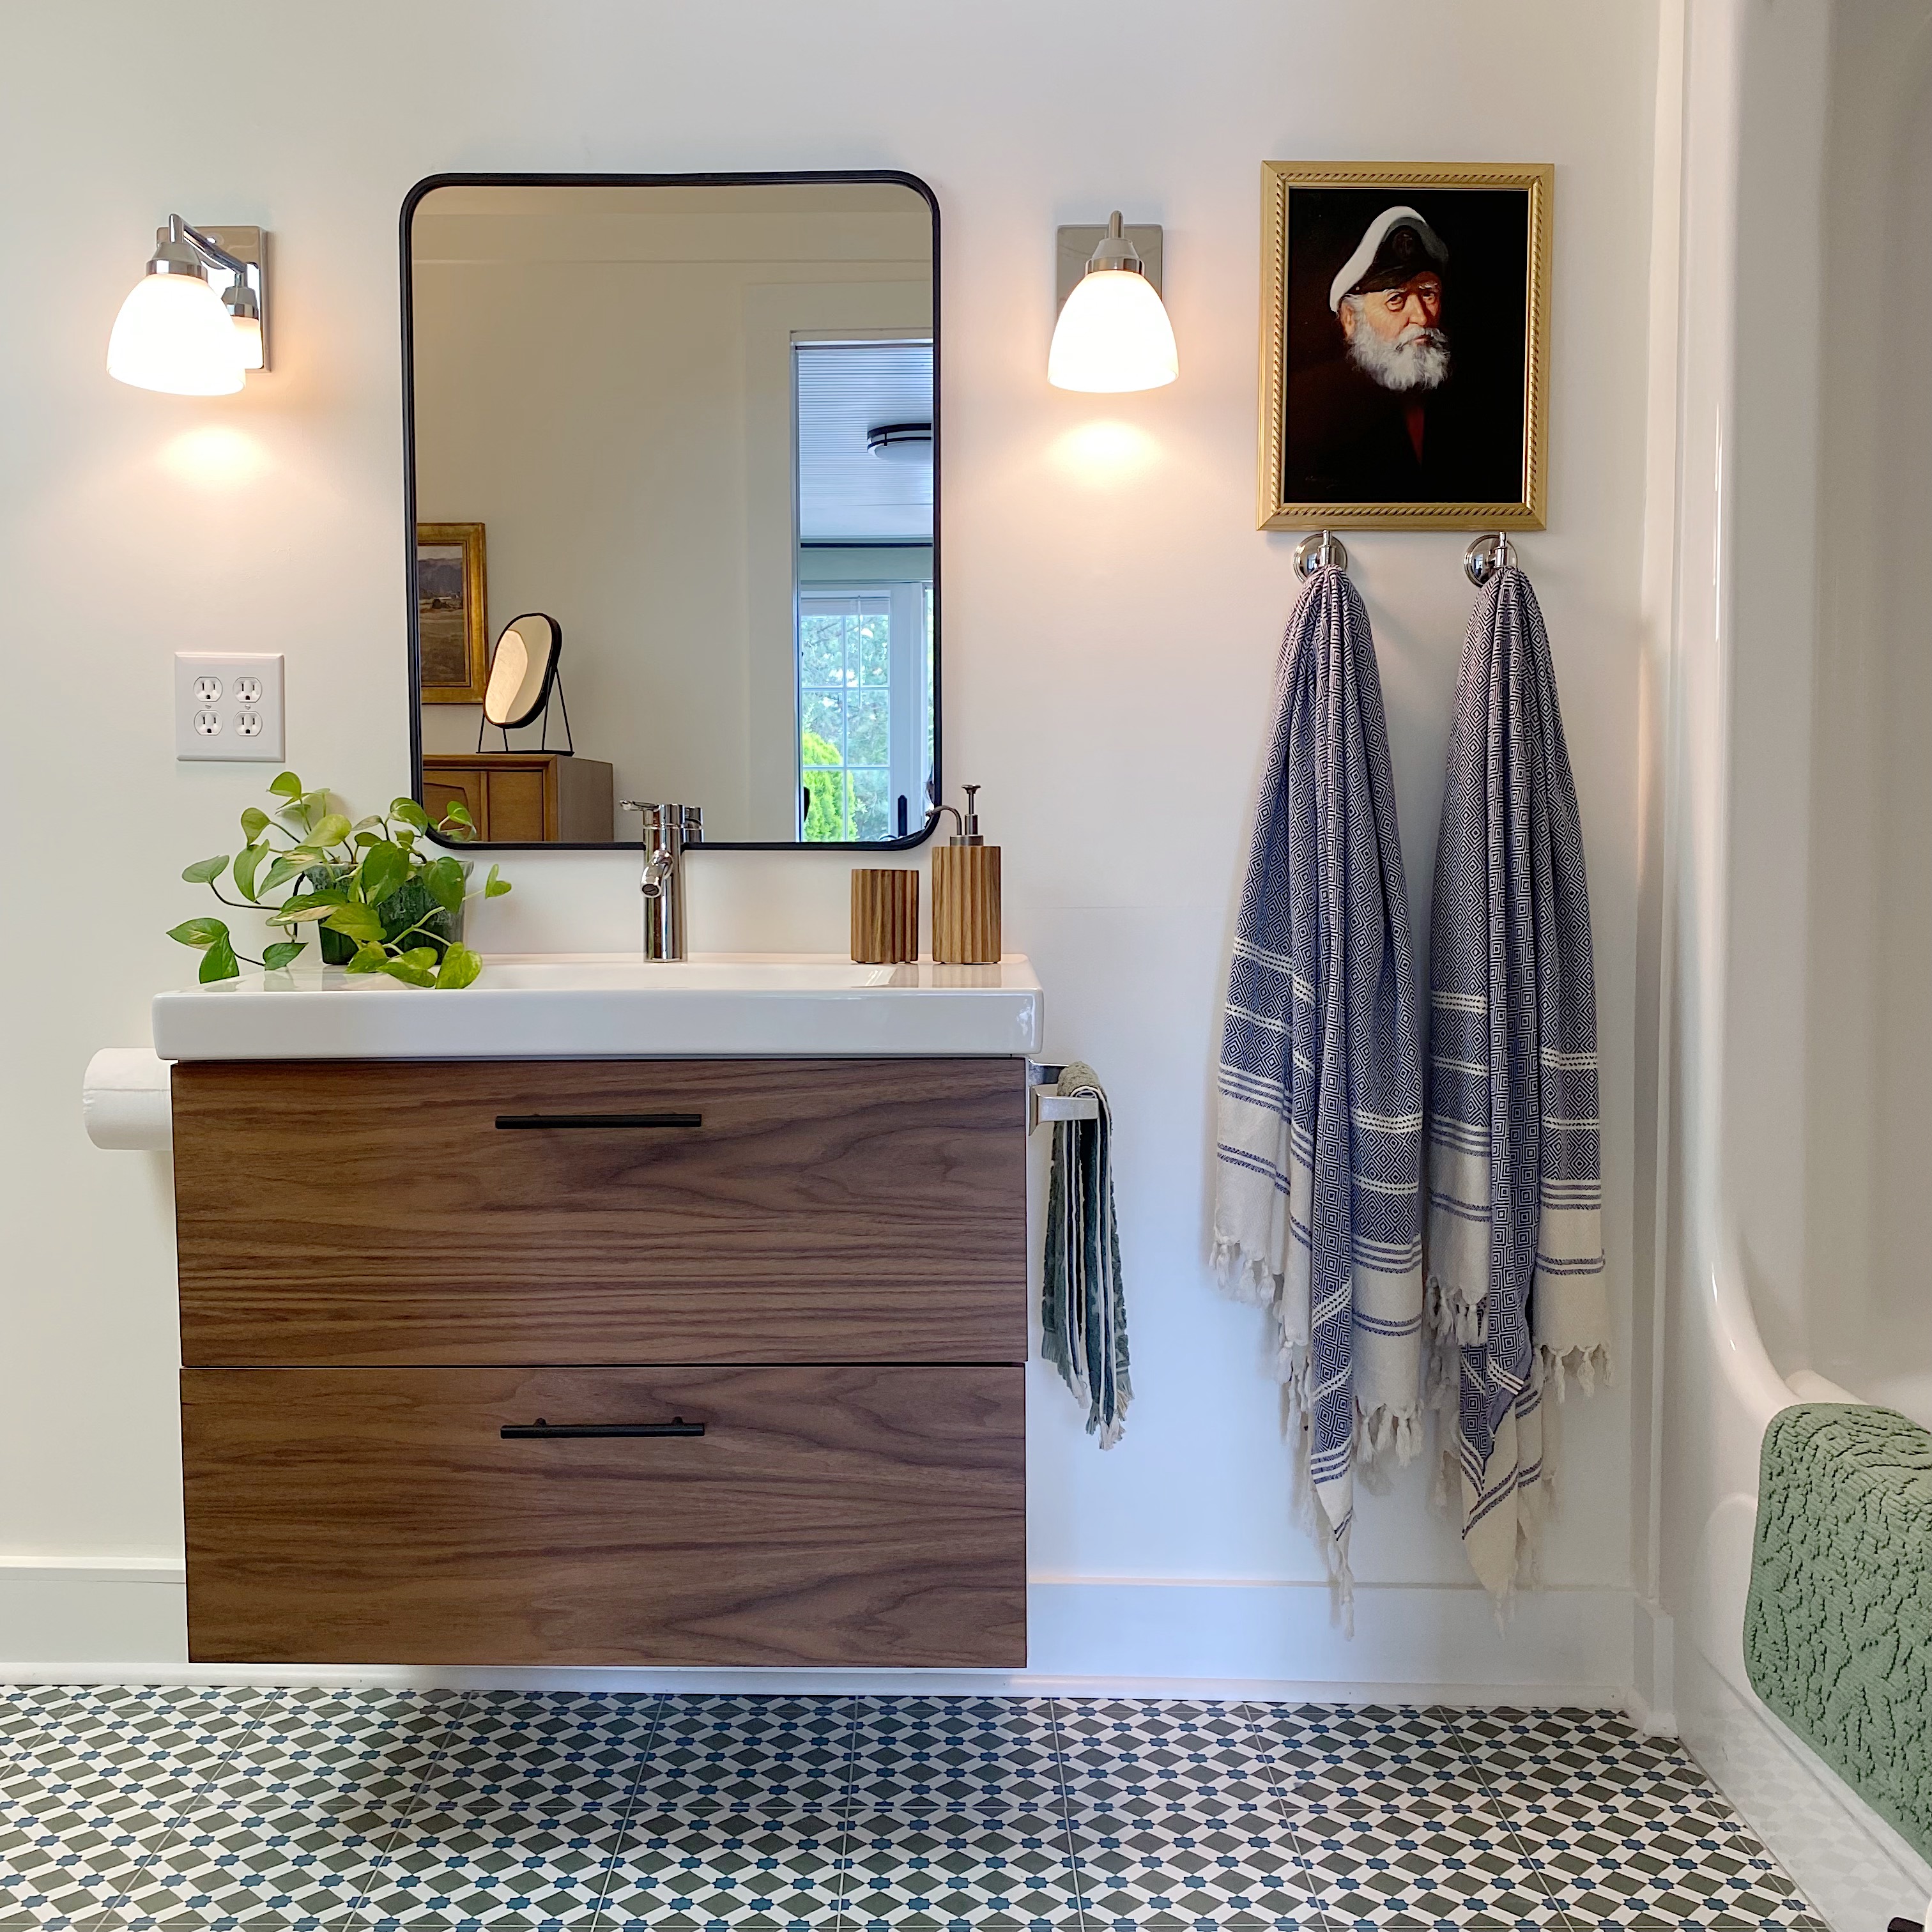 white bathroom with patterned floor tile, Ikea vanity with wood drawer fronts and black framed mirror